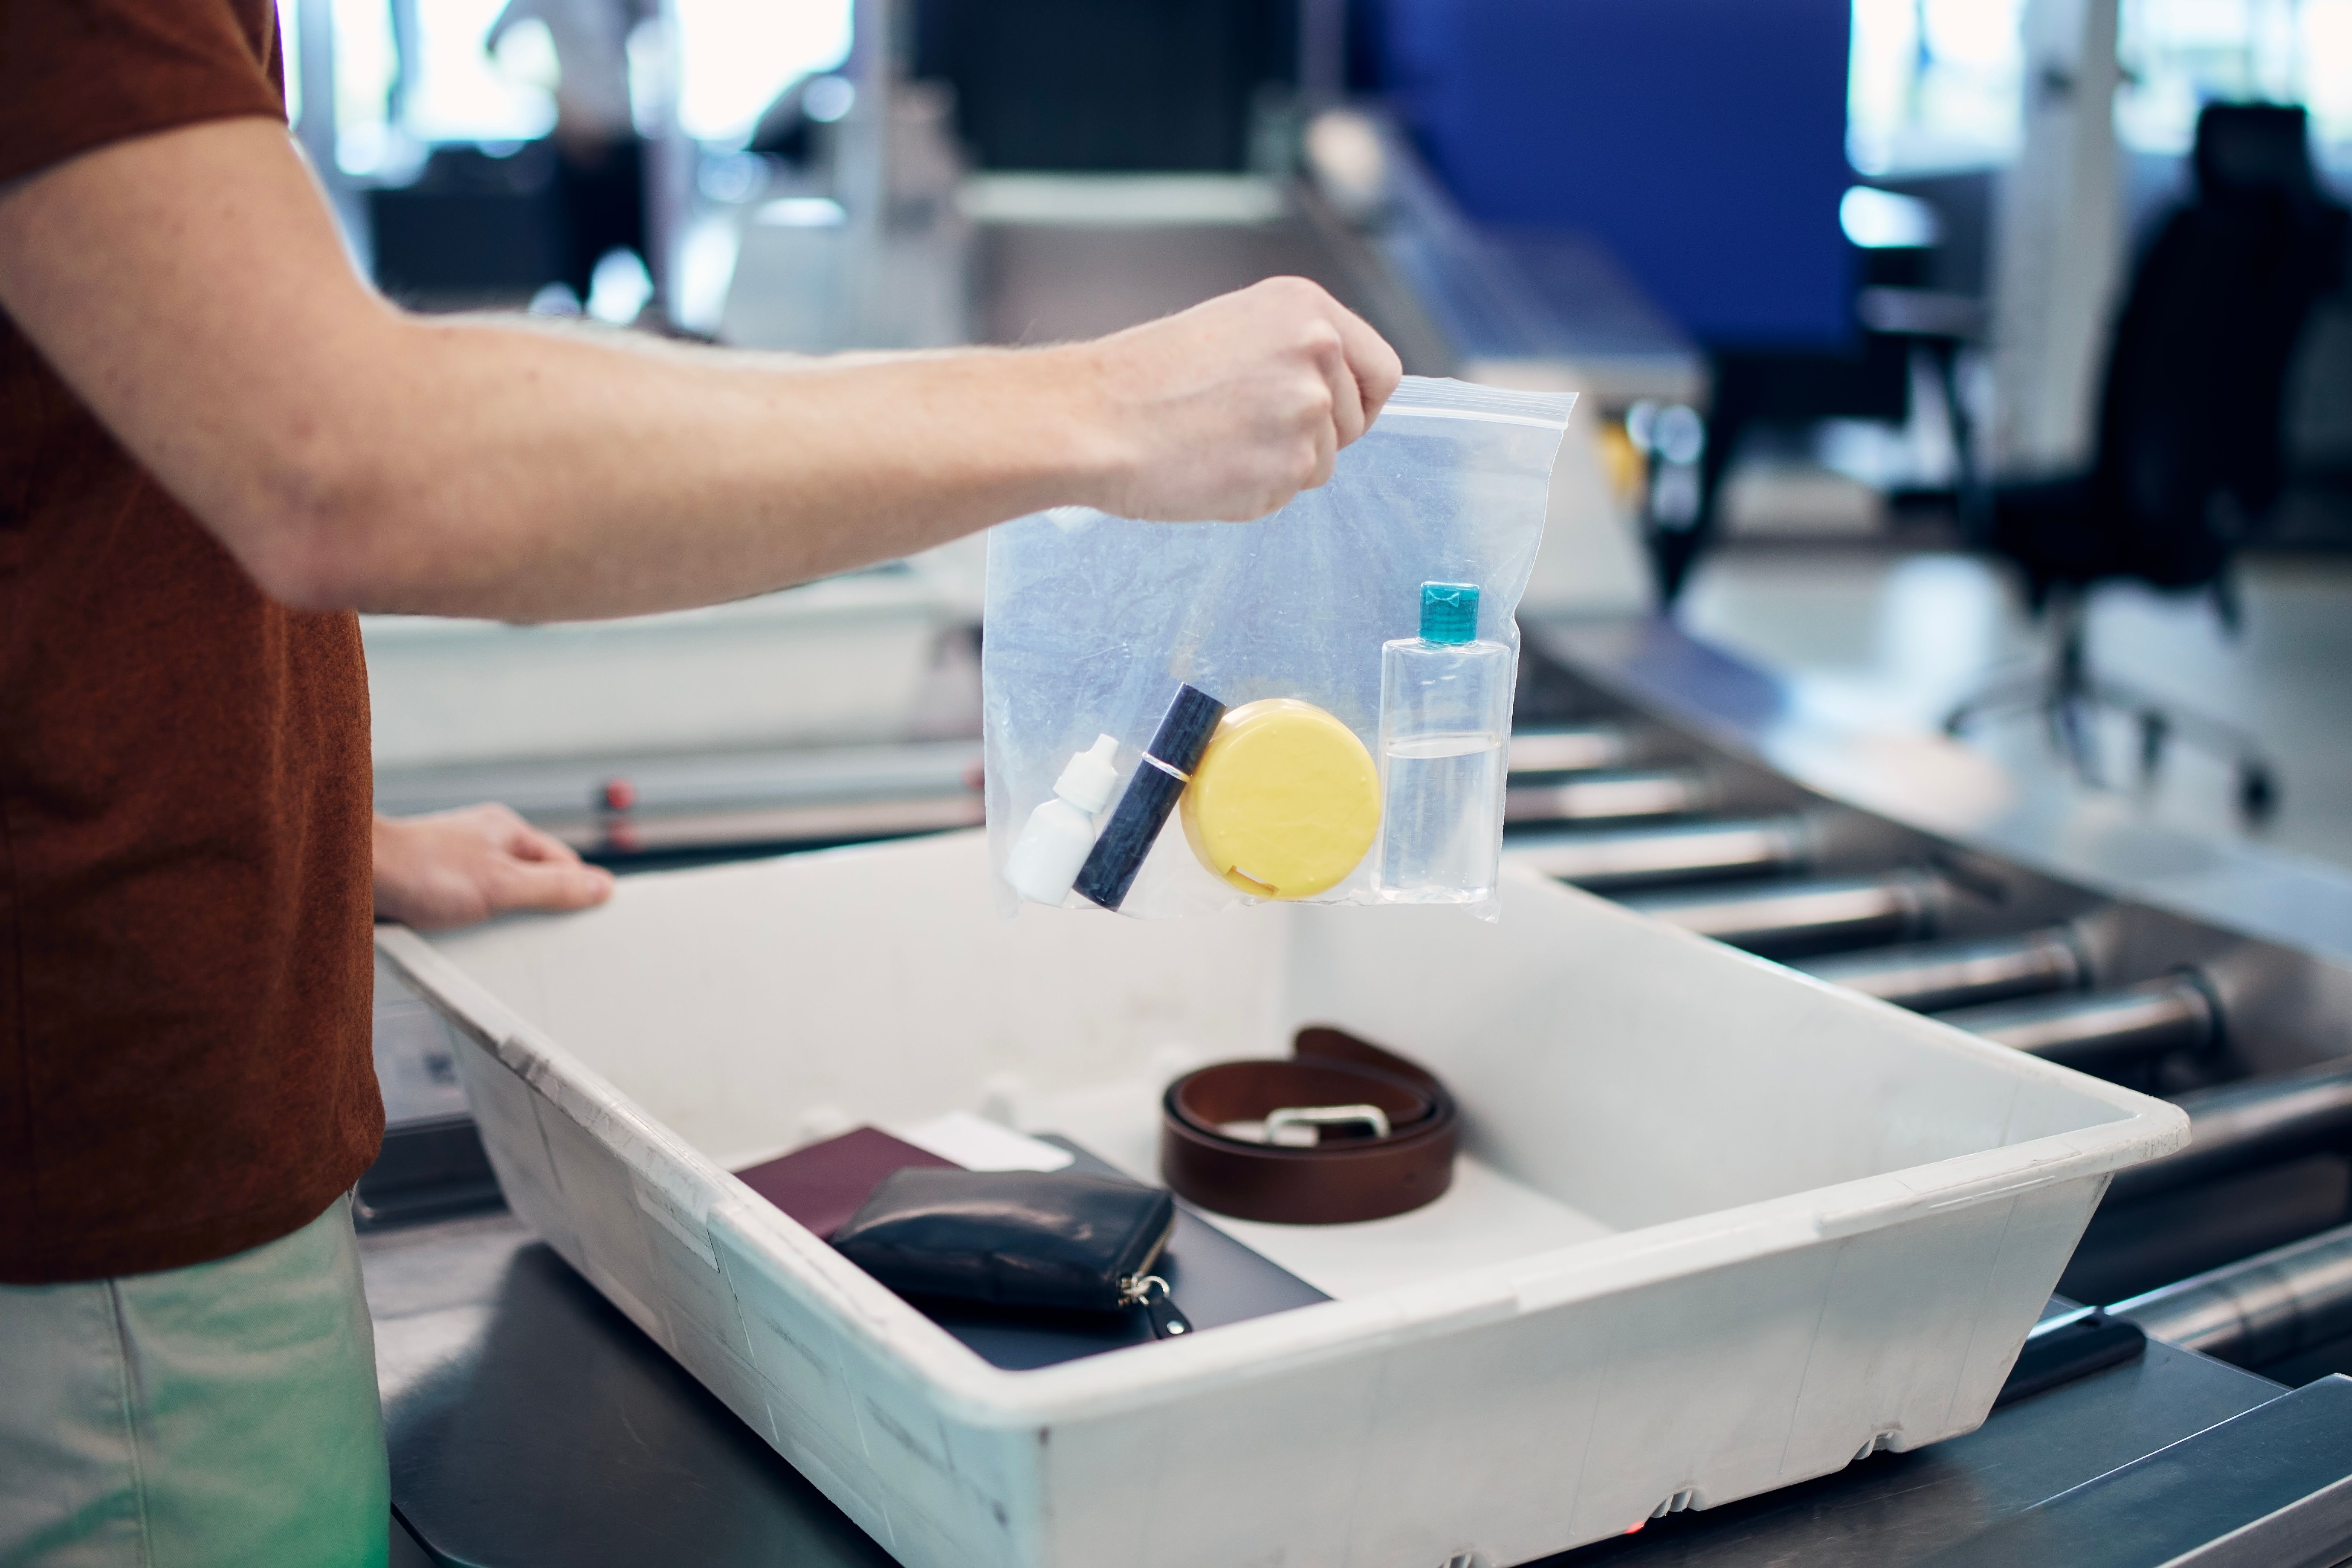 A passenger placing a zip bag filled with small liquid items into an airport security bin.